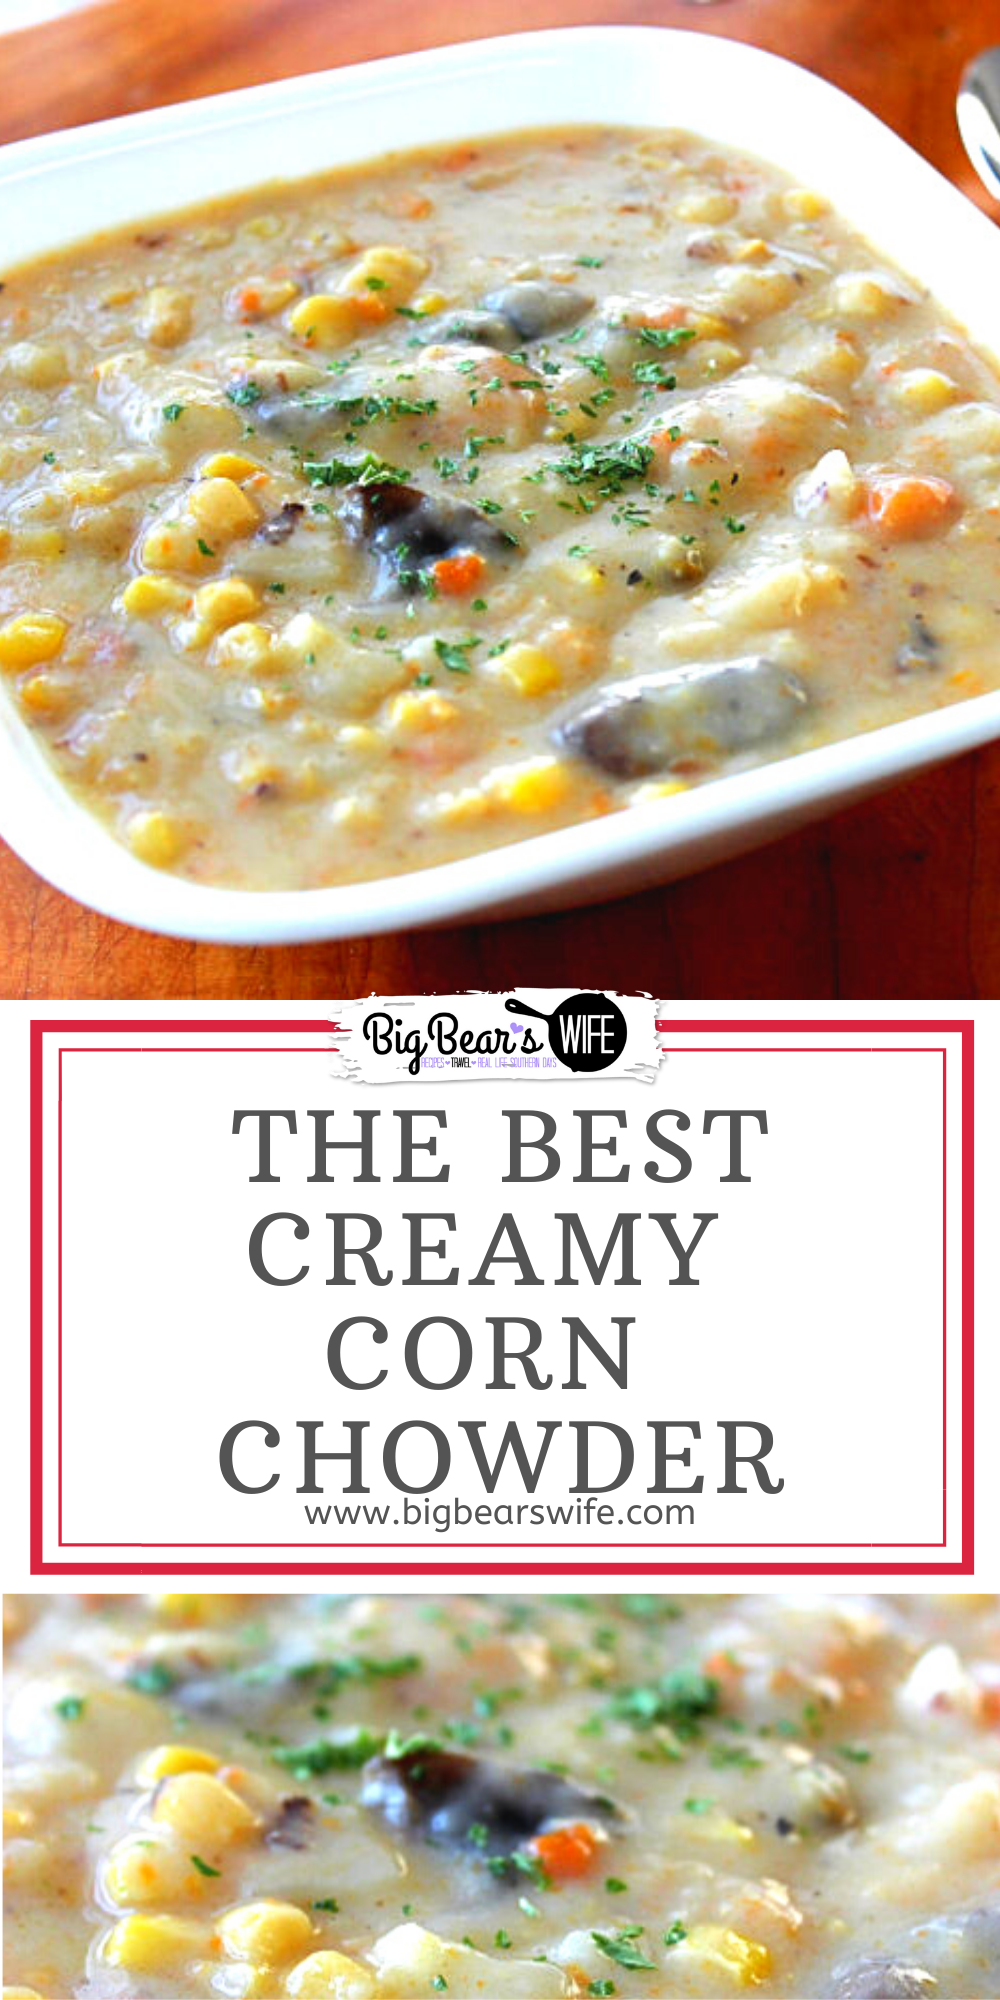 This Creamy Corn Chowder is an amazing recipe for any soup lover! It's easy to make and will warm you up on cold evenings! Perfect flavors for a perfect dinner!  via @bigbearswife